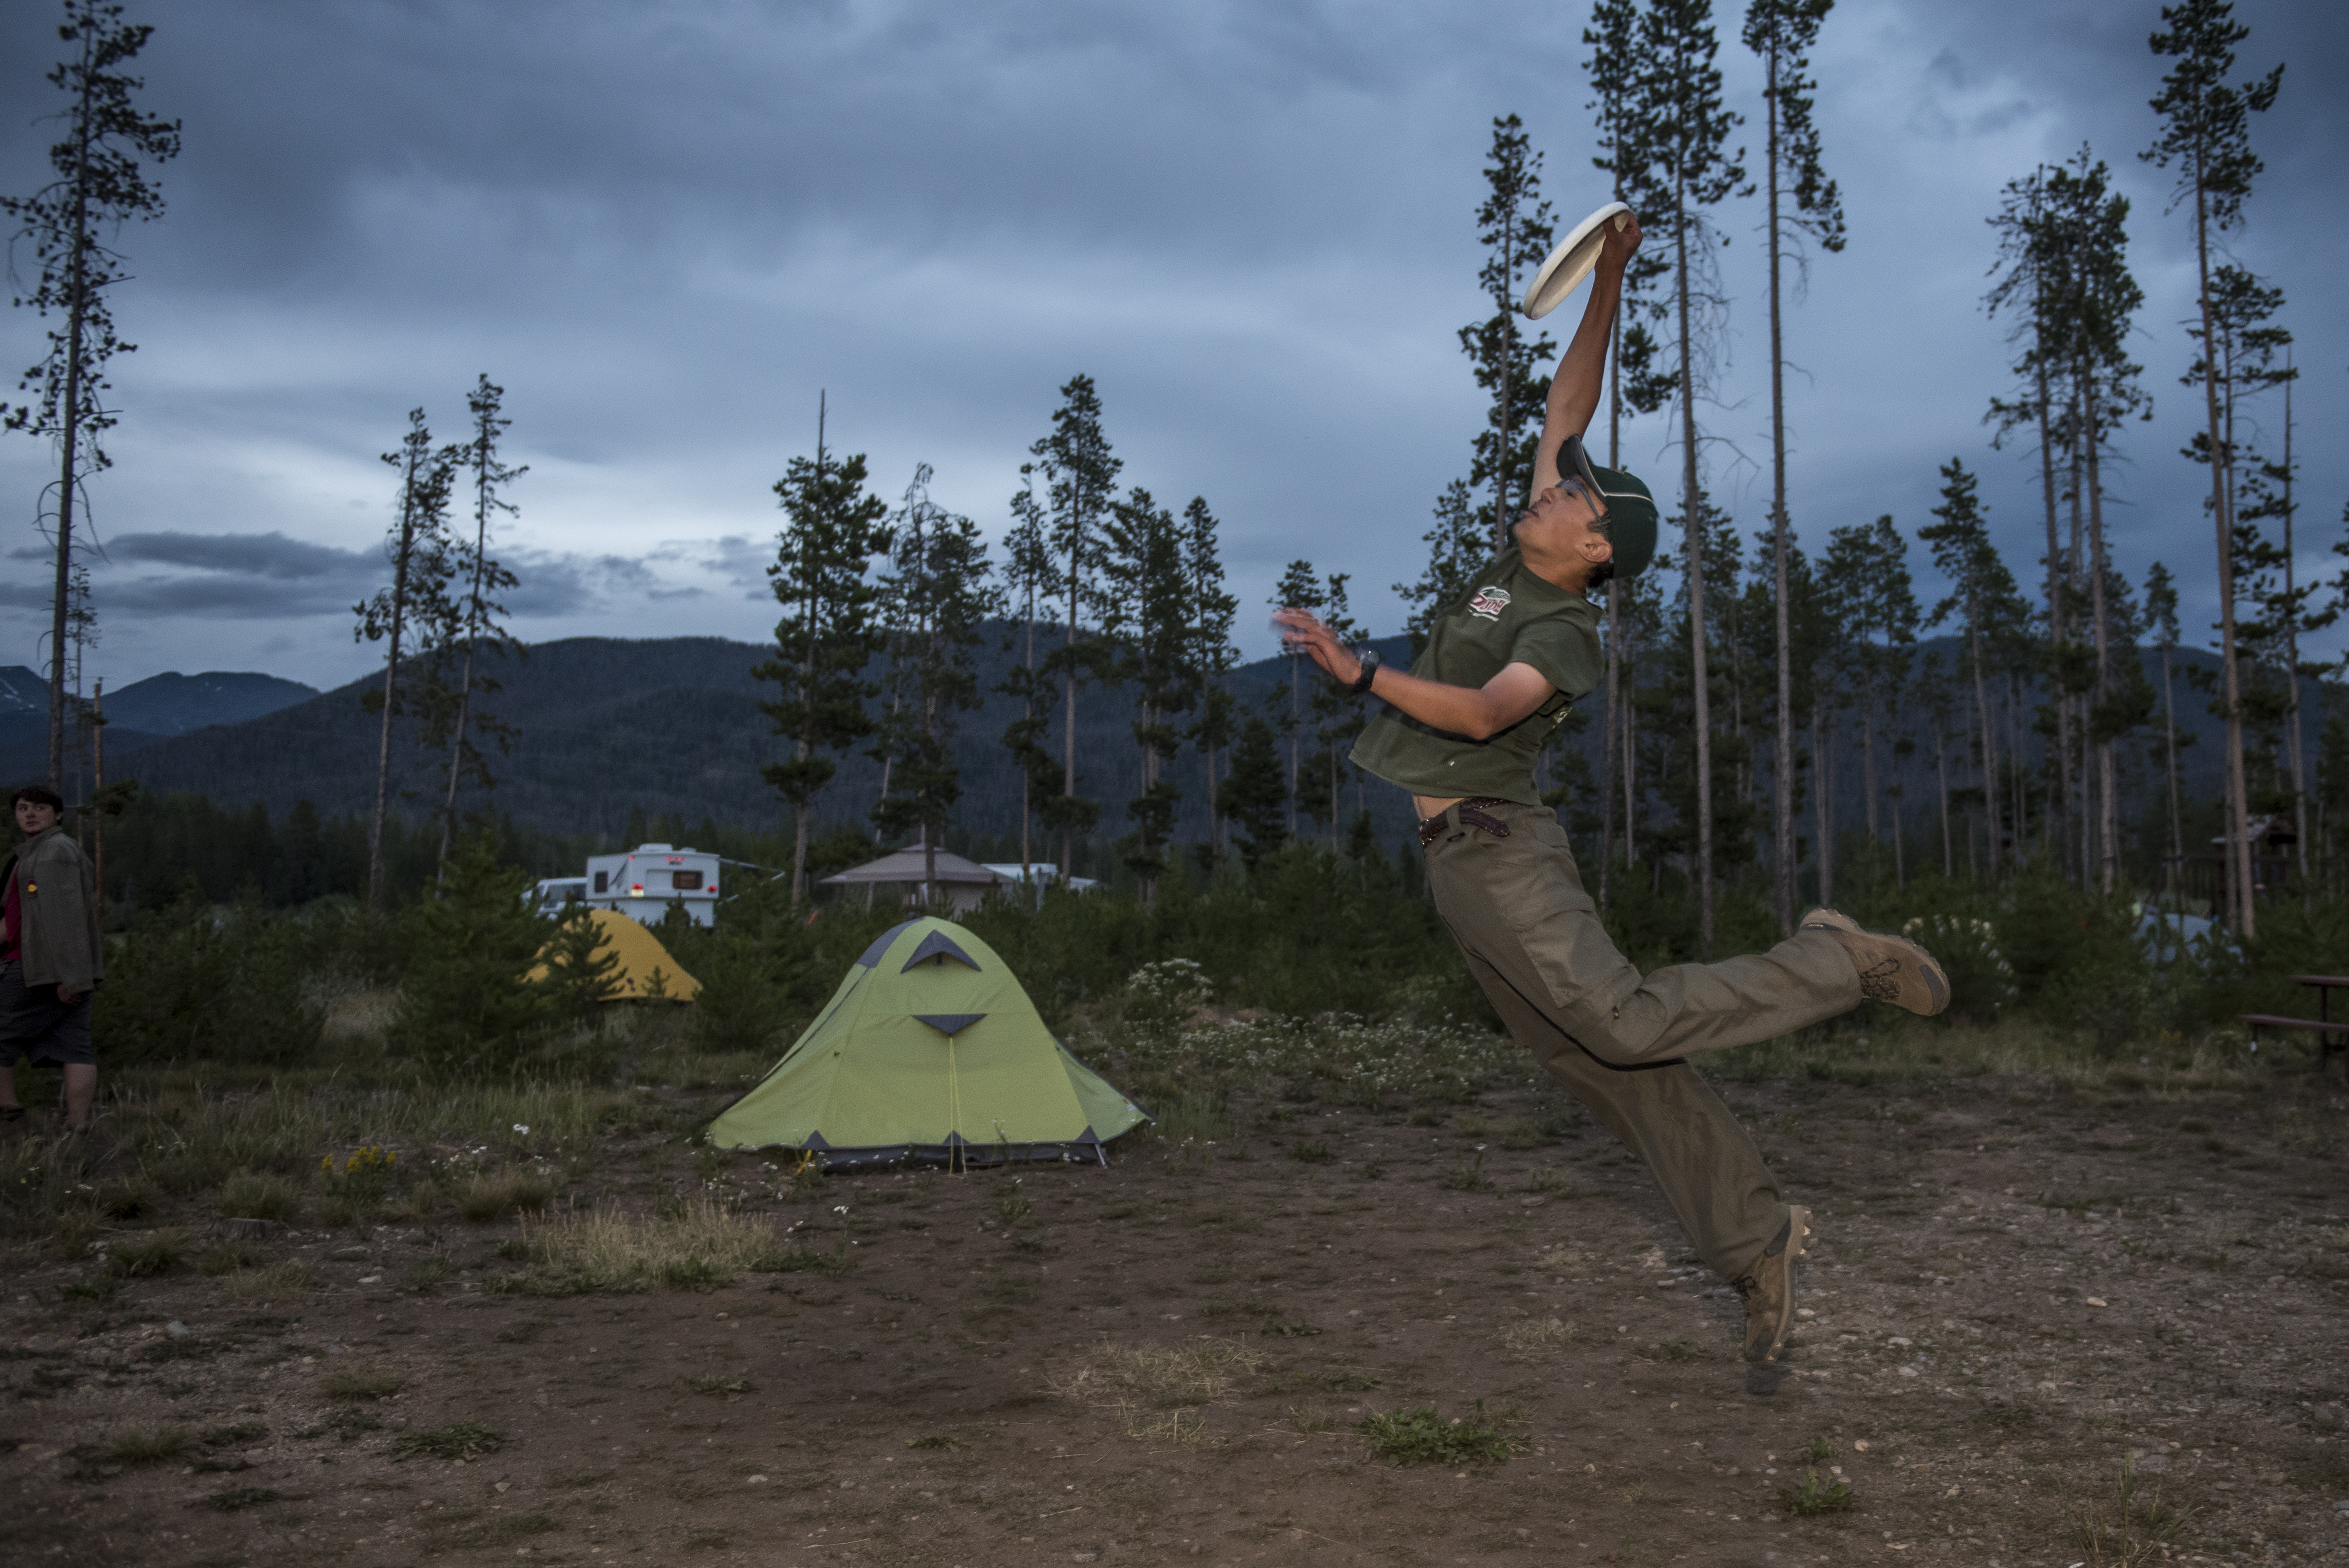 Scouts from PA eat  and do evening activities at a campground on the the edge of Rocky Mountain National Park,  Colorado.